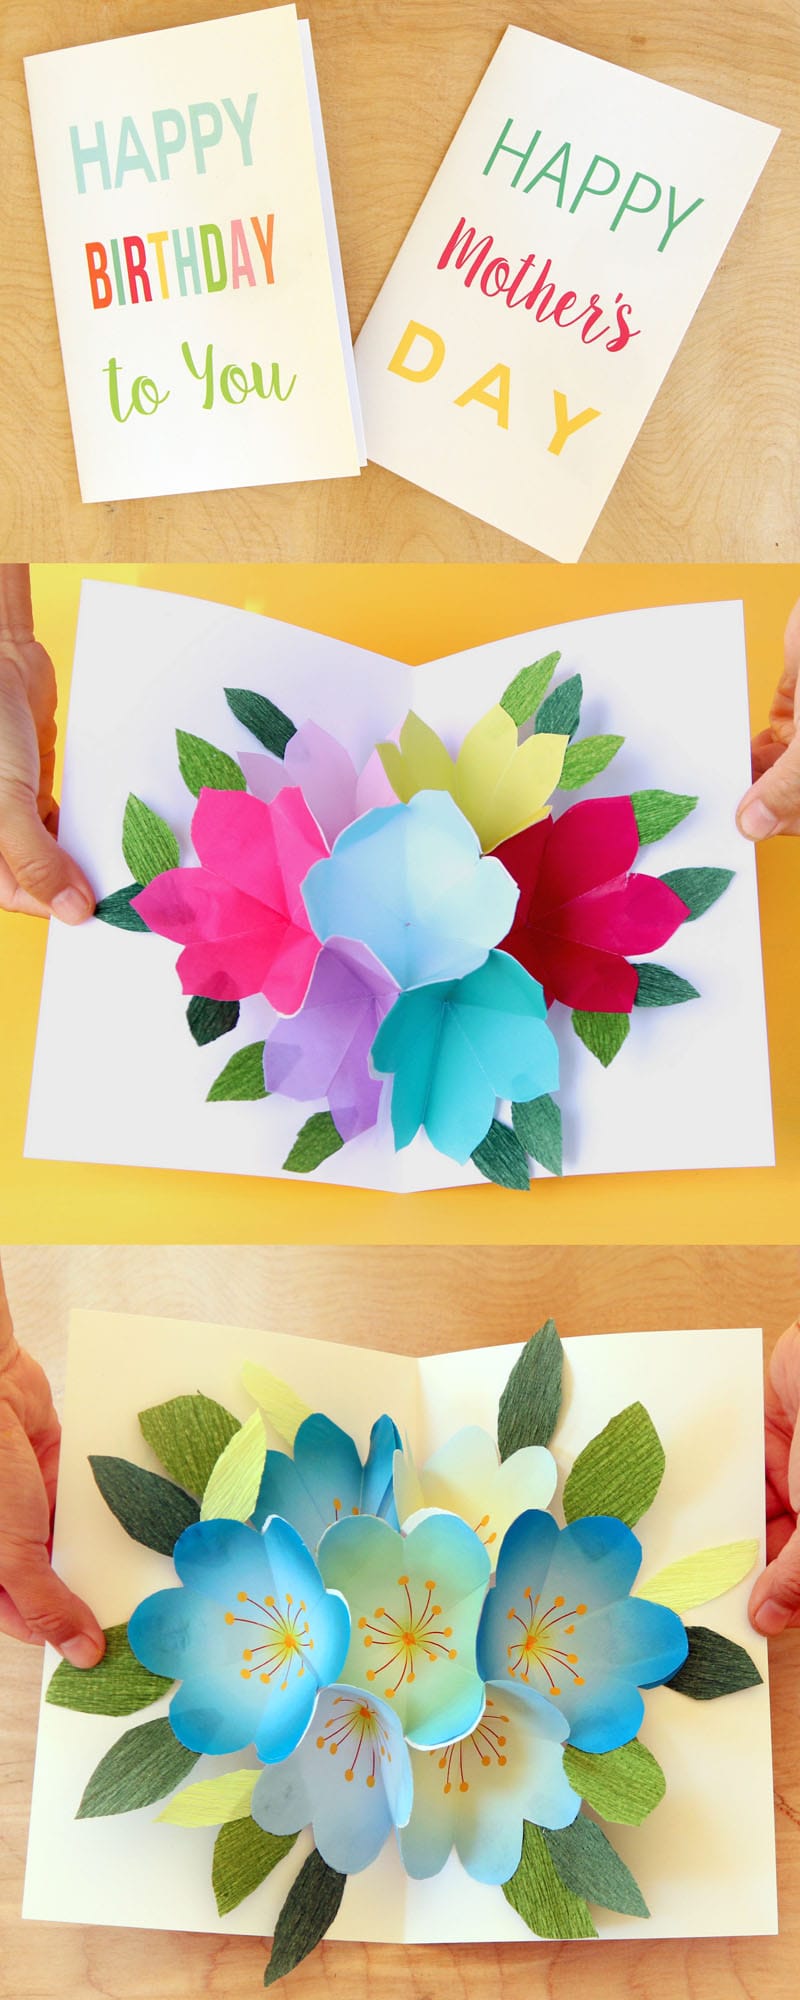 Free Printable Happy Birthday Card with Pop Up Bouquet - A Piece In Free Printable Pop Up Card Templates